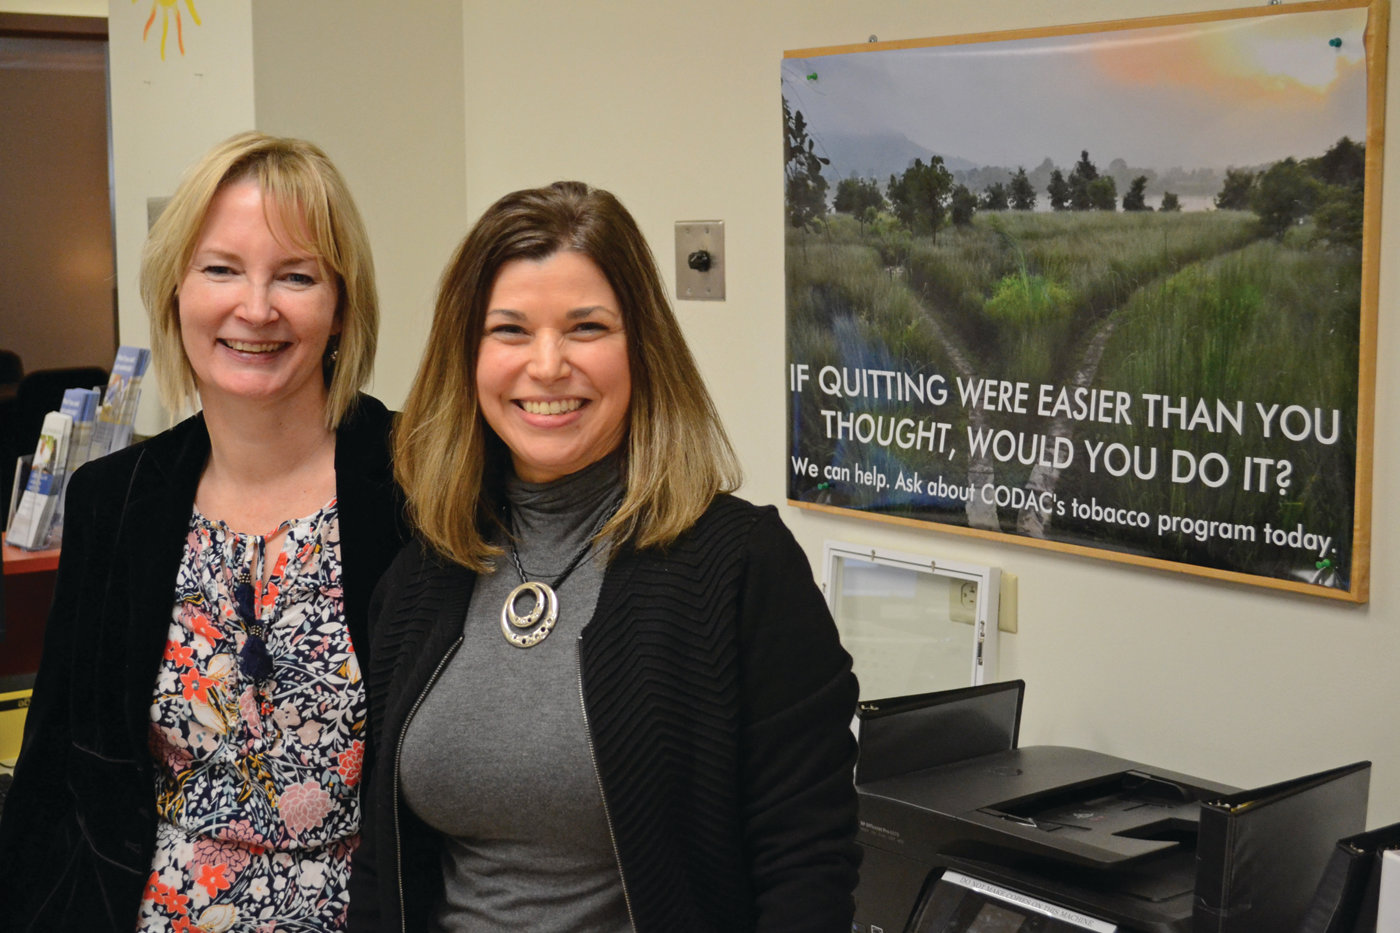 QUITTING COMFORTABLY: Lisabeth Bennett, clinical director of CODAC’s tobacco cessation program, and Kristina Micheli, clinical supervisor for CODAC, focus on helping people quit in a way that works for them, without focusing on hard deadlines or being overly militant about willpower.